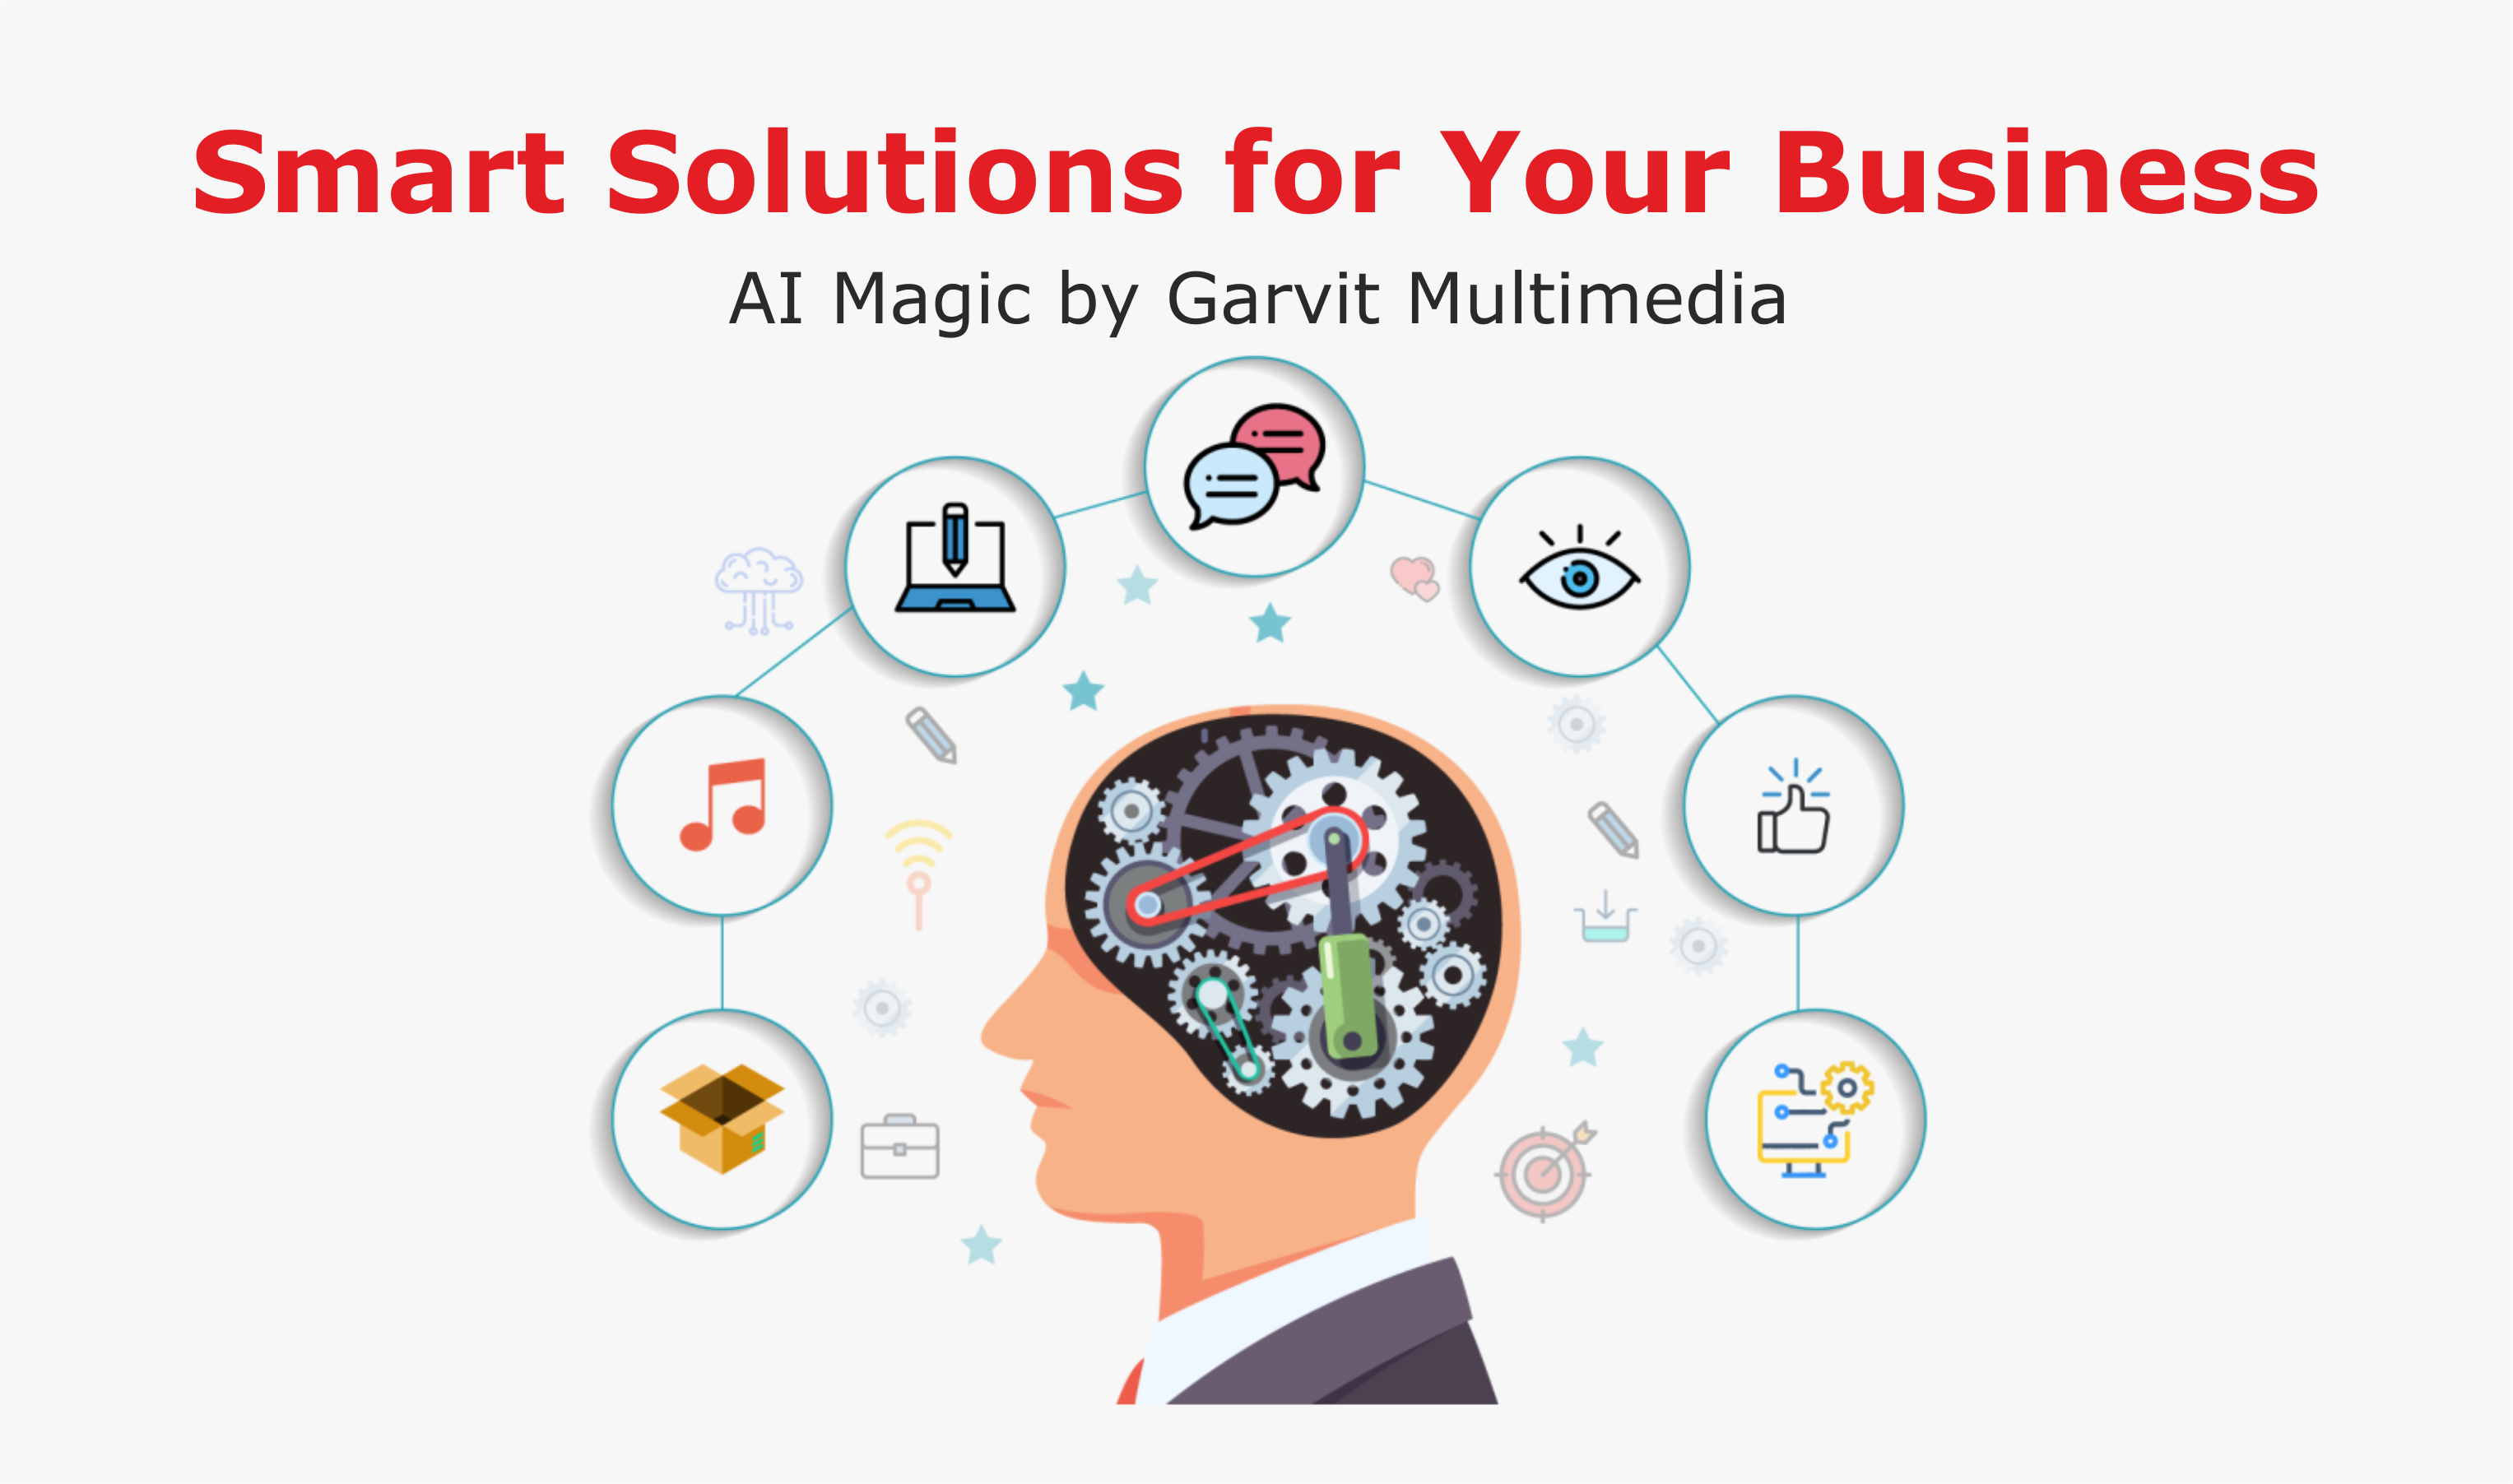 Smart Solutions for Your Business: AI Magic by Garvit Multimedia